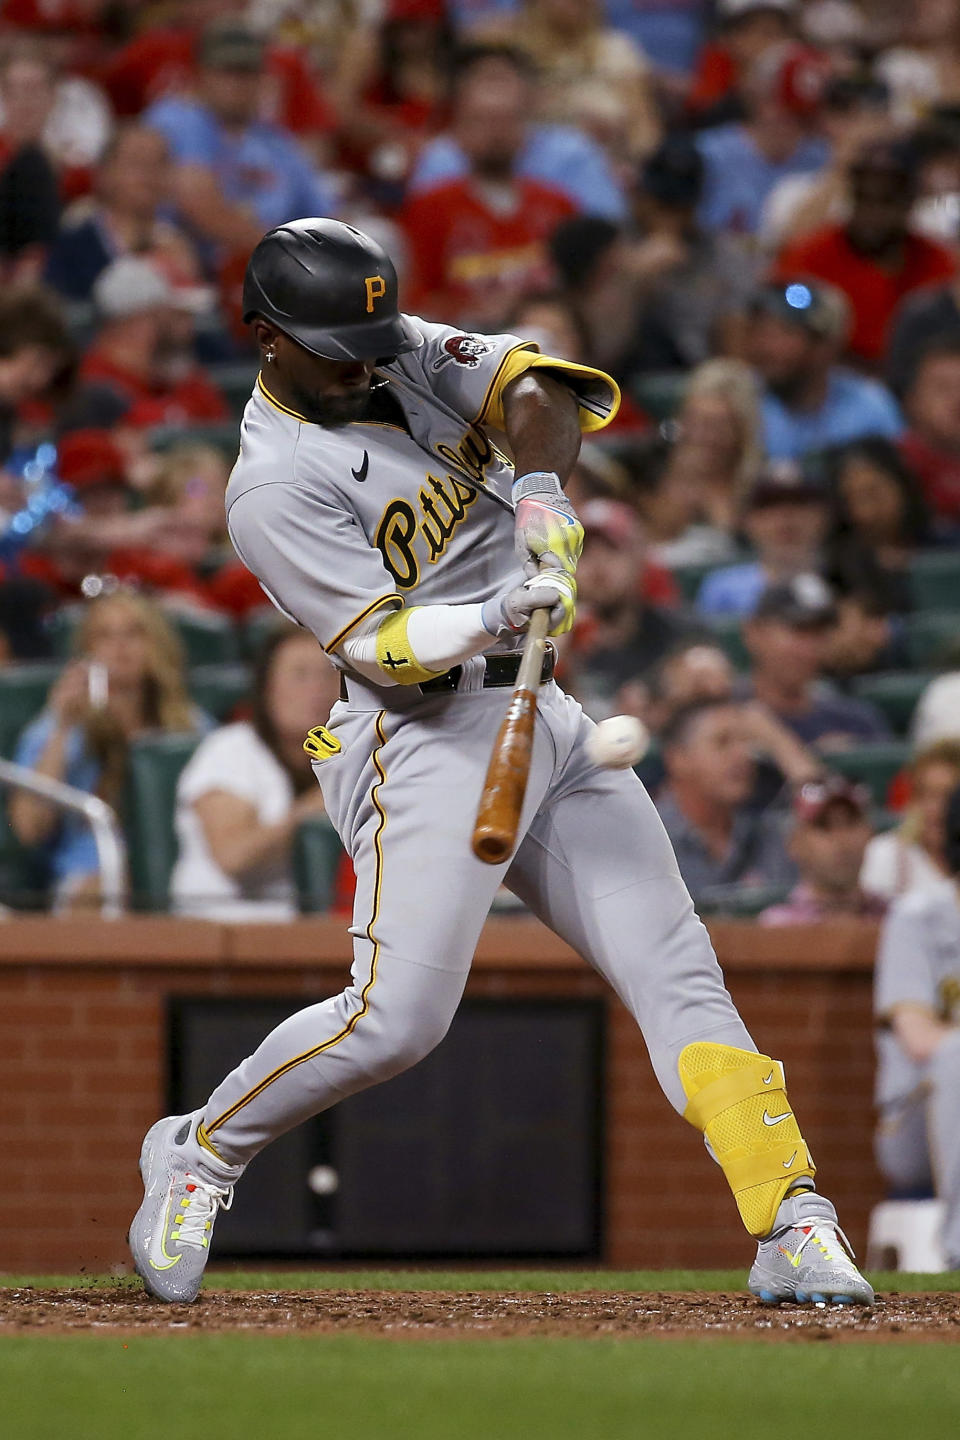 Pittsburgh Pirates' Andrew McCutchen hits a sacrifice fly during the seventh inning against the St. Louis Cardinals in a baseball game Thursday, April 13, 2023, in St. Louis. (AP Photo/Scott Kane)